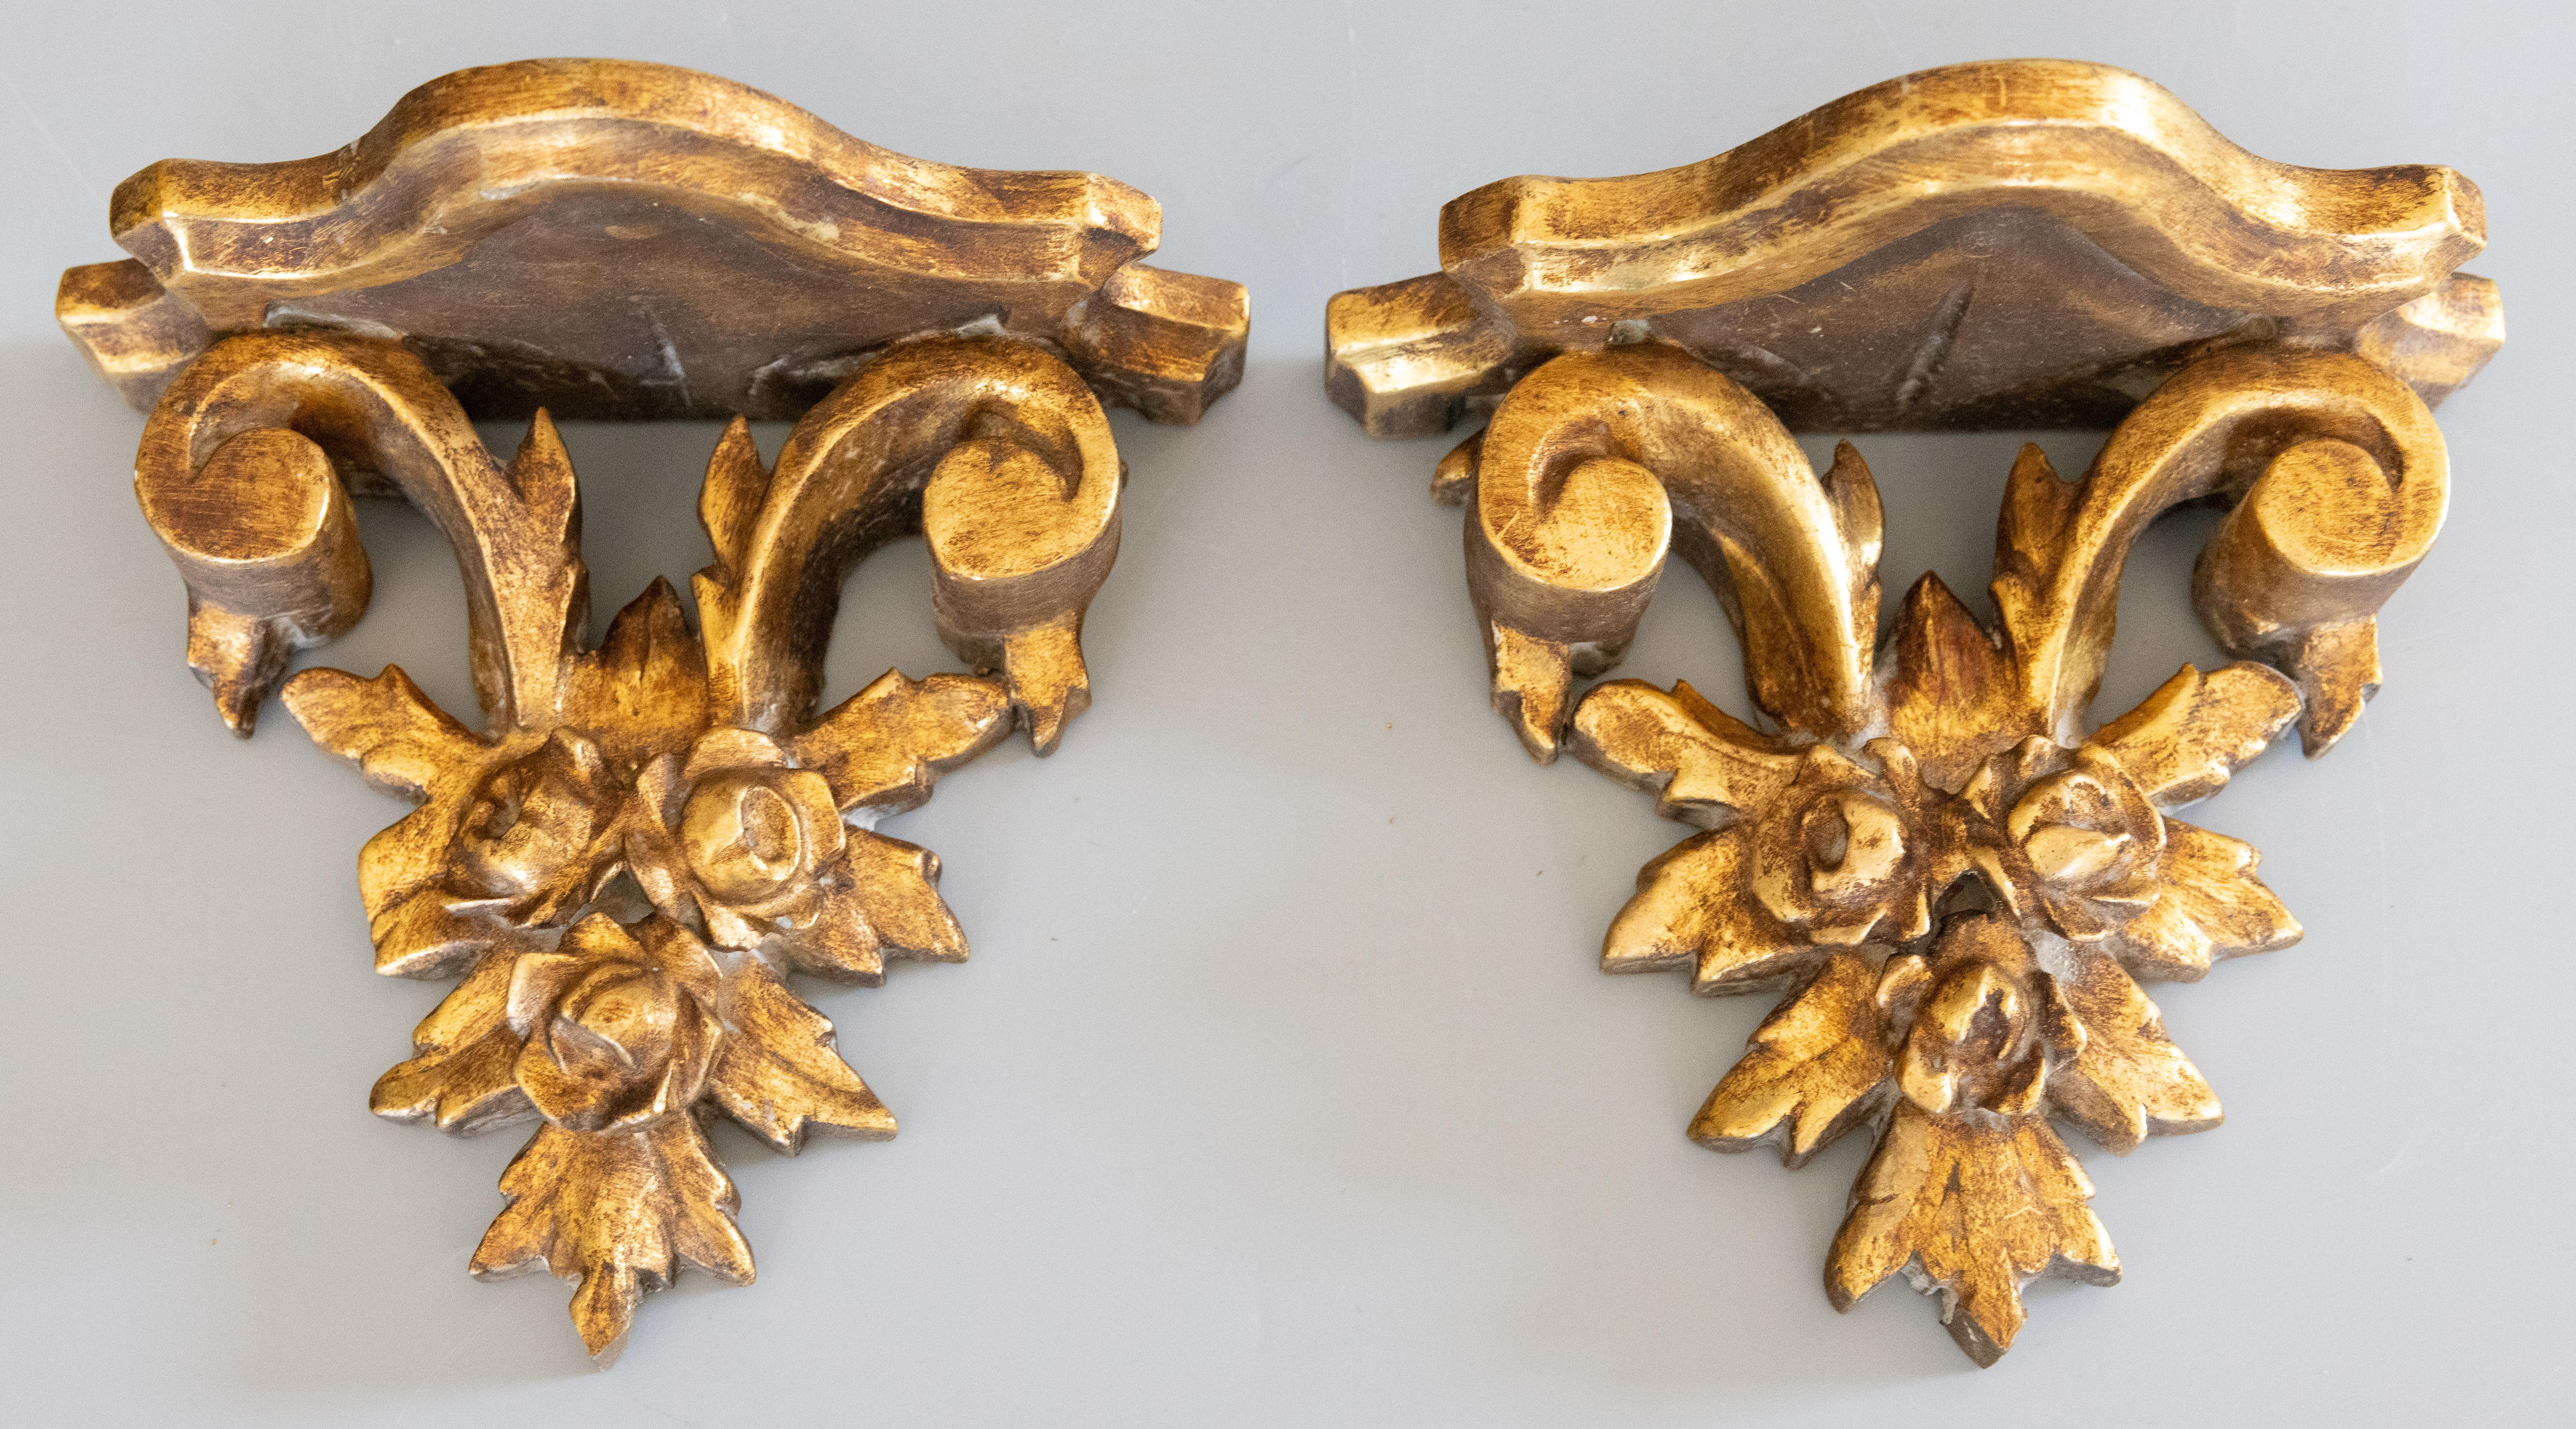 A lovely pair of vintage Italian gilded wood and gesso wall brackets shelves, circa 1950. They are decorated with lovely roses and scrolls in a beautiful gilt patina, perfect for displaying decorative collectibles or fabulous on their